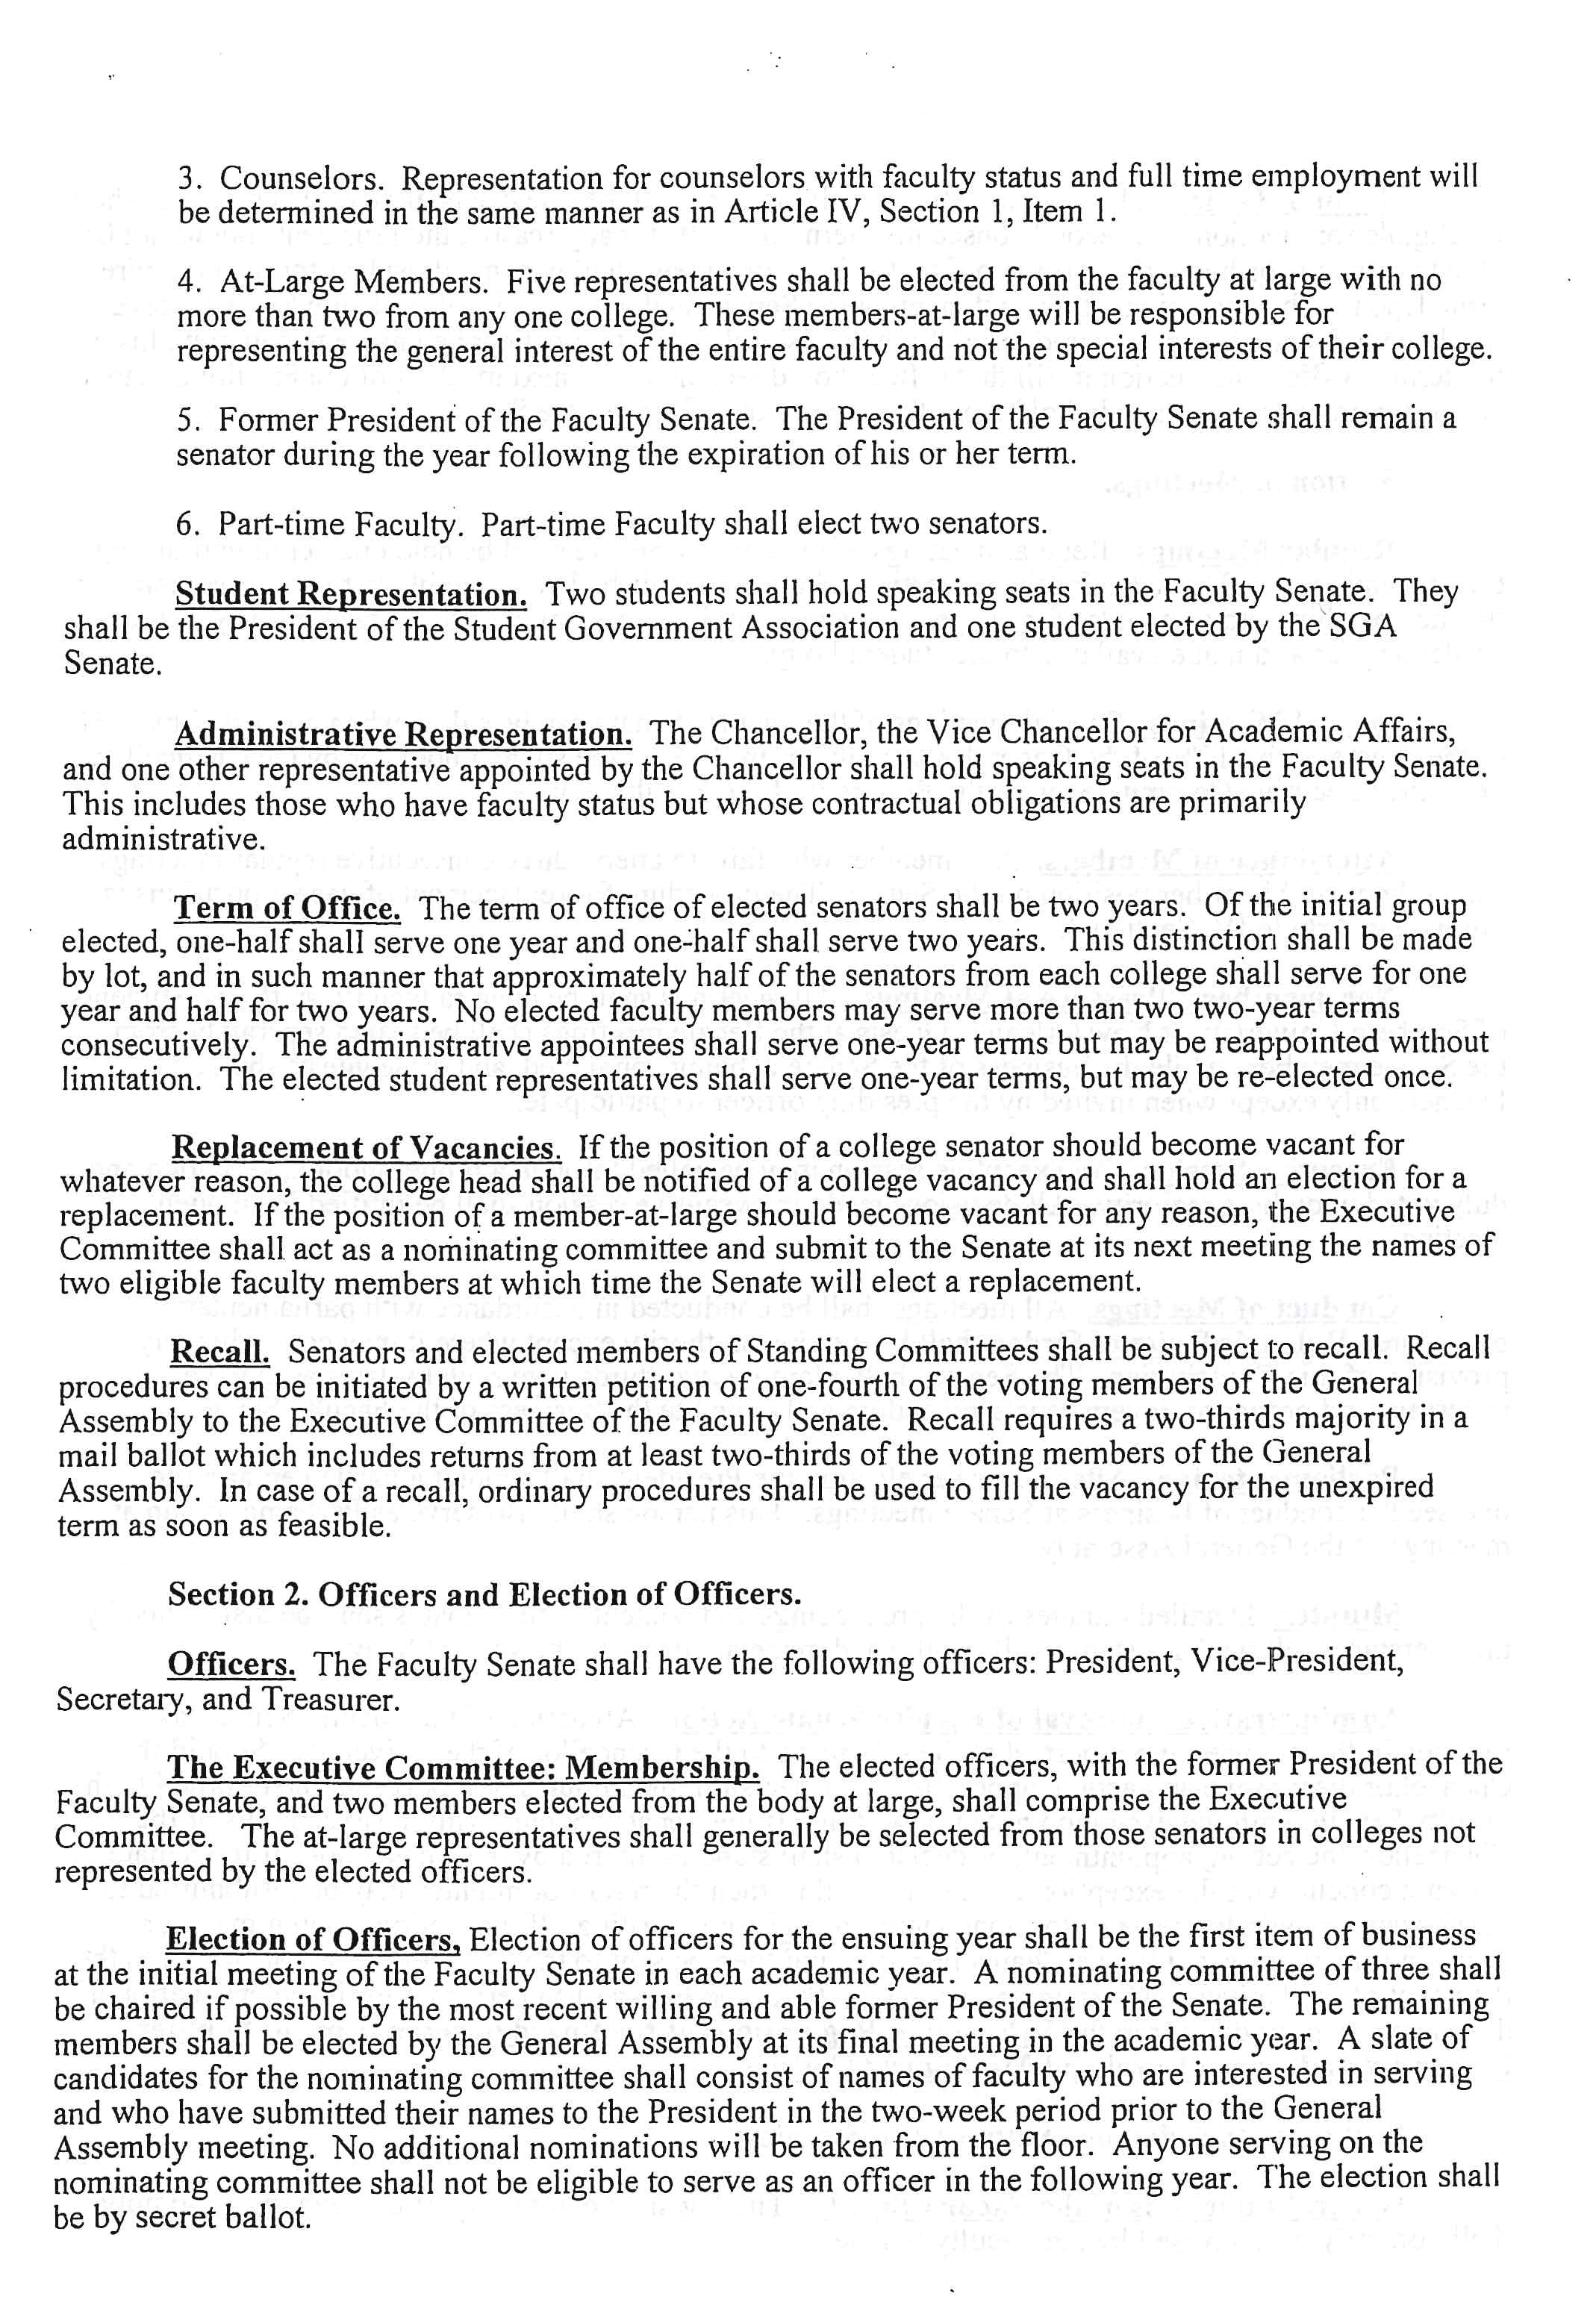 Constitution and Bylaws - Page 3